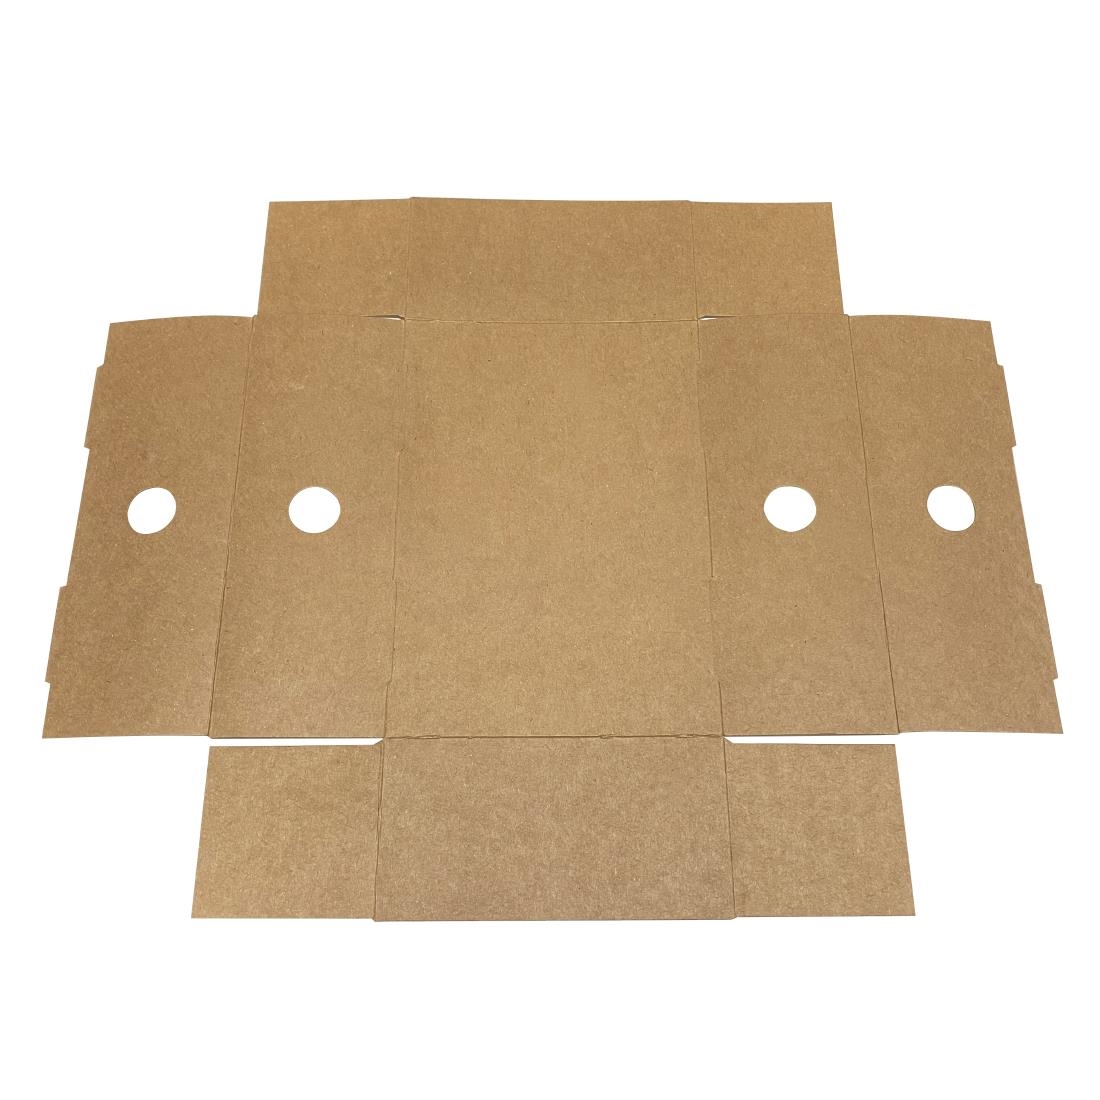 Fiesta Recyclable Insert For Platter Box 1-4 Pack of 50 (FT674 ...